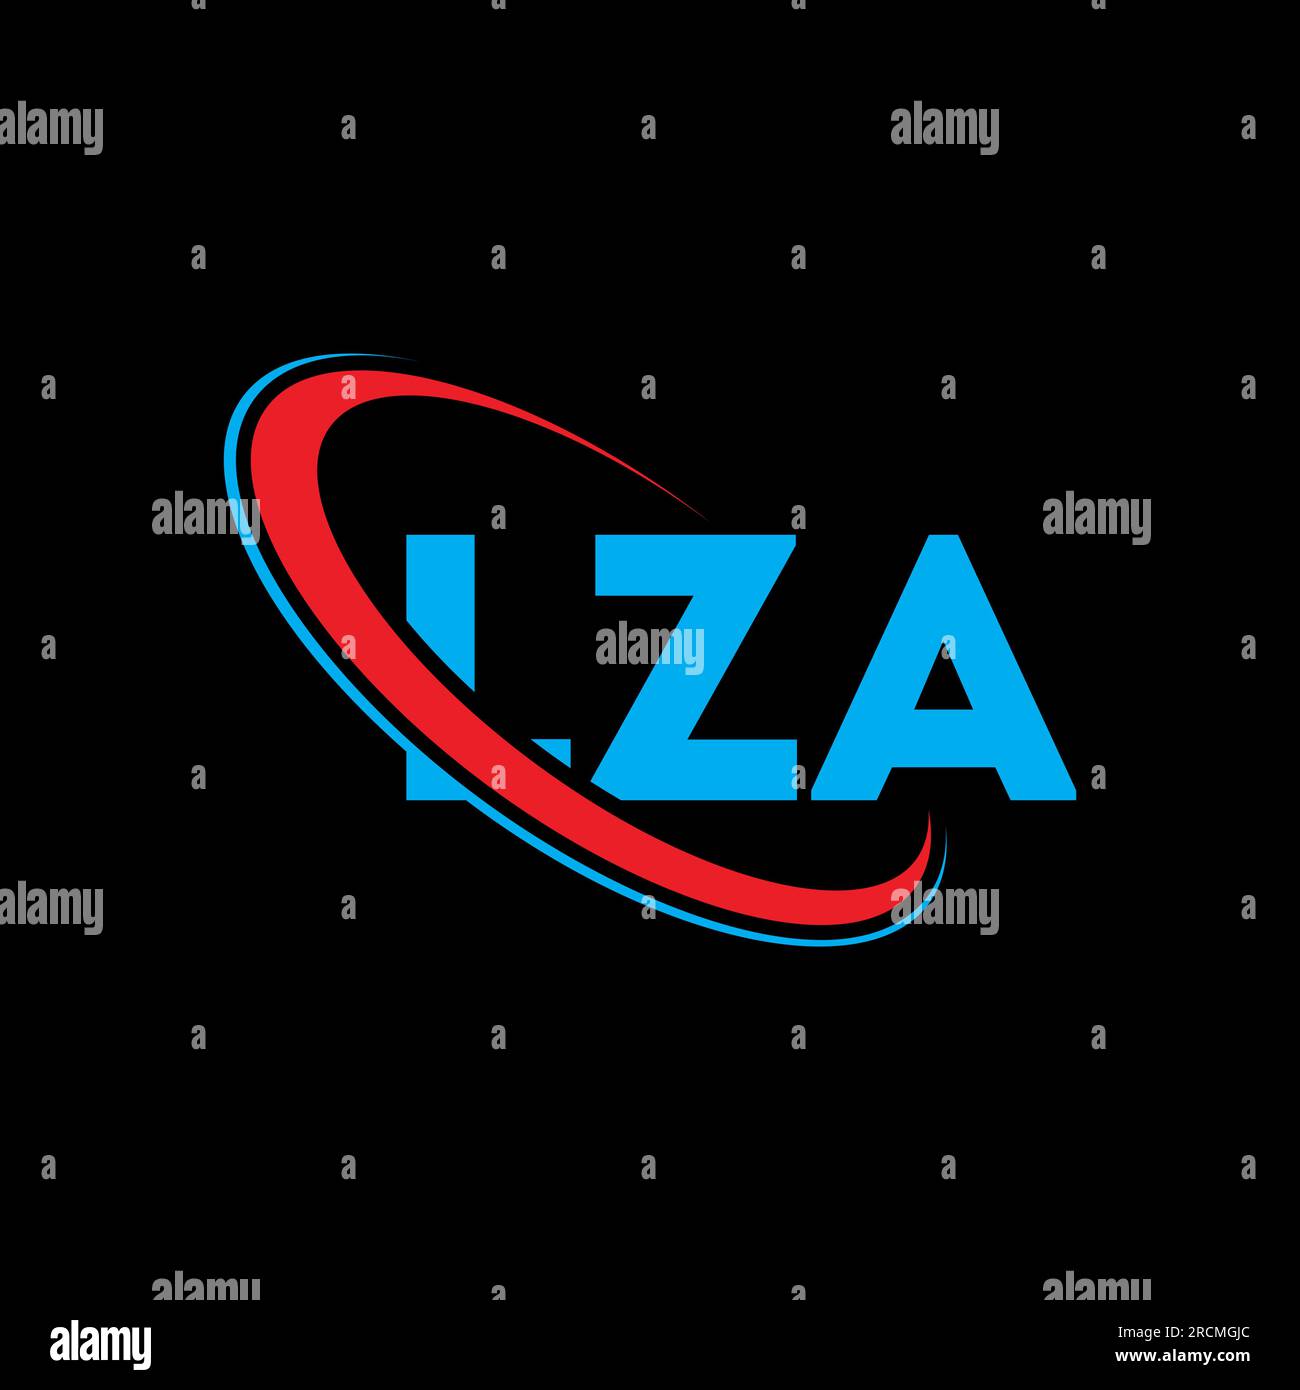 LZA logo. LZA letter. LZA letter logo design. Initials LZA logo linked with circle and uppercase monogram logo. LZA typography for technology, busines Stock Vector